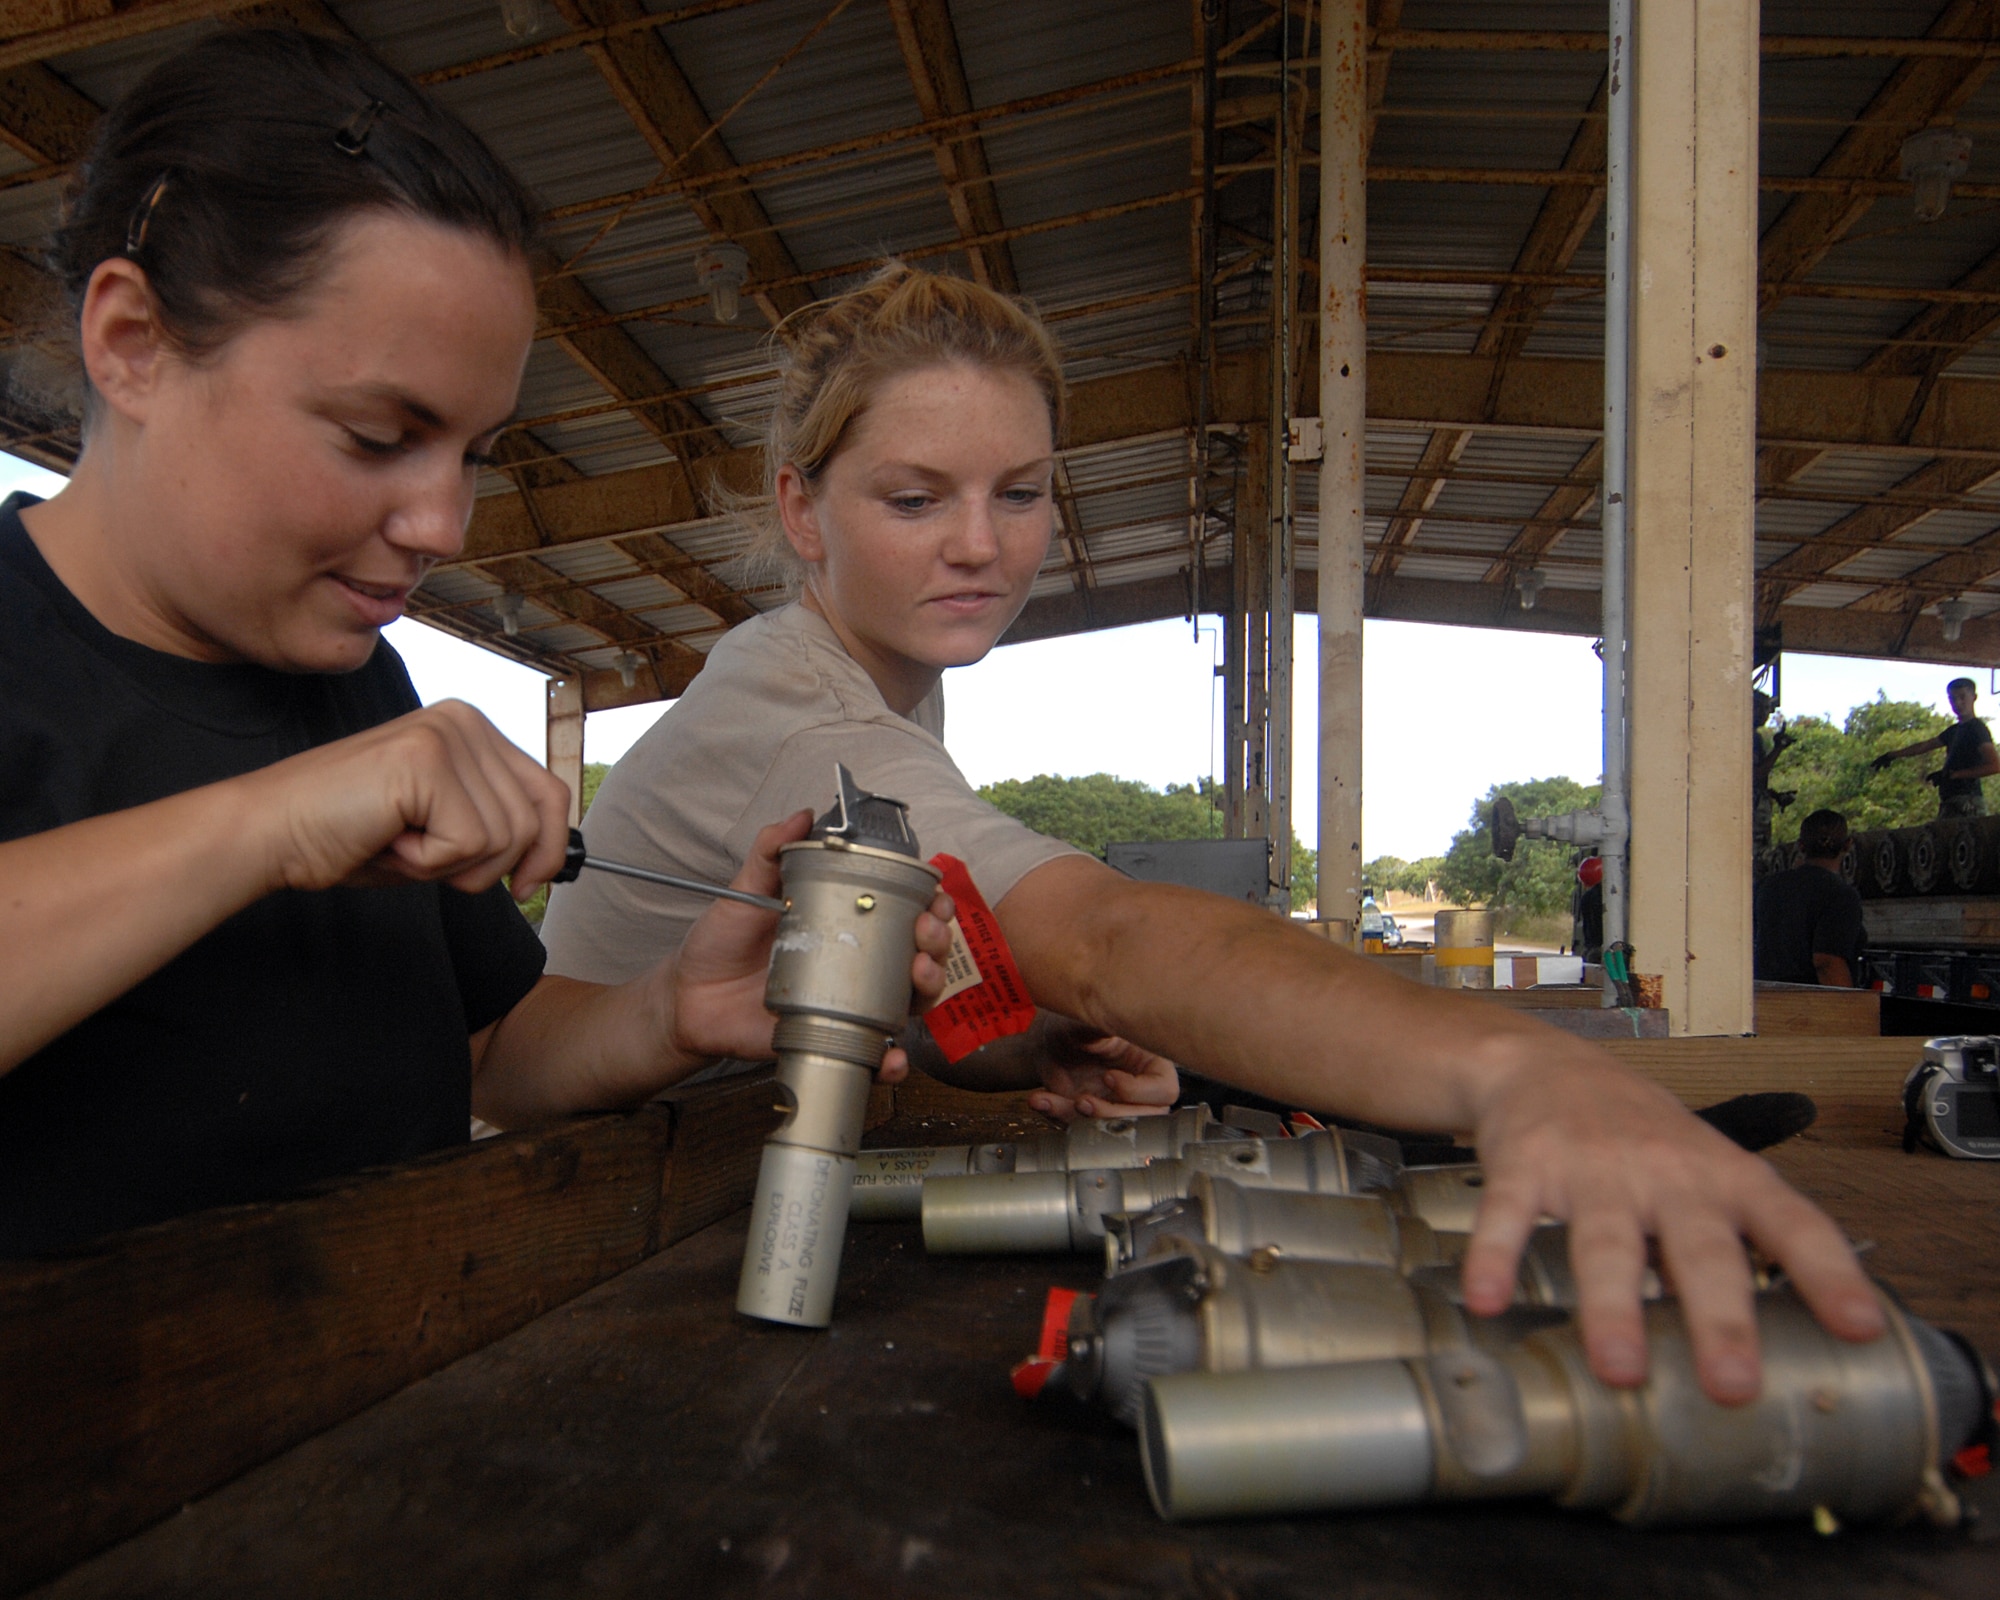 Andersen Air Force Base, Guam - Senior Airman Julia Unsworth and Airman First Class Casey Carrano inspect M904 nose fuzes before inserting them into M117 bombs. The 36th Munitions Squadron is building 270 free-fall, unguided, general purpose 750-pound M117 bombs that will eventually be loaded on a B-52 Stratofortress jet. In a conventional conflict, the B-52 can carry nuclear or precision guided conventional ordnance with worldwide precision navigation capability. SrA Unsworth is deployed from the 2nd Maintenance Group from Barksdale AFB, La. and A1C Carrano is with the 36th Munitions Squadron at Andersen AFB.(U.S. Air Force photo/Staff Sgt. Vanessa Valentine)